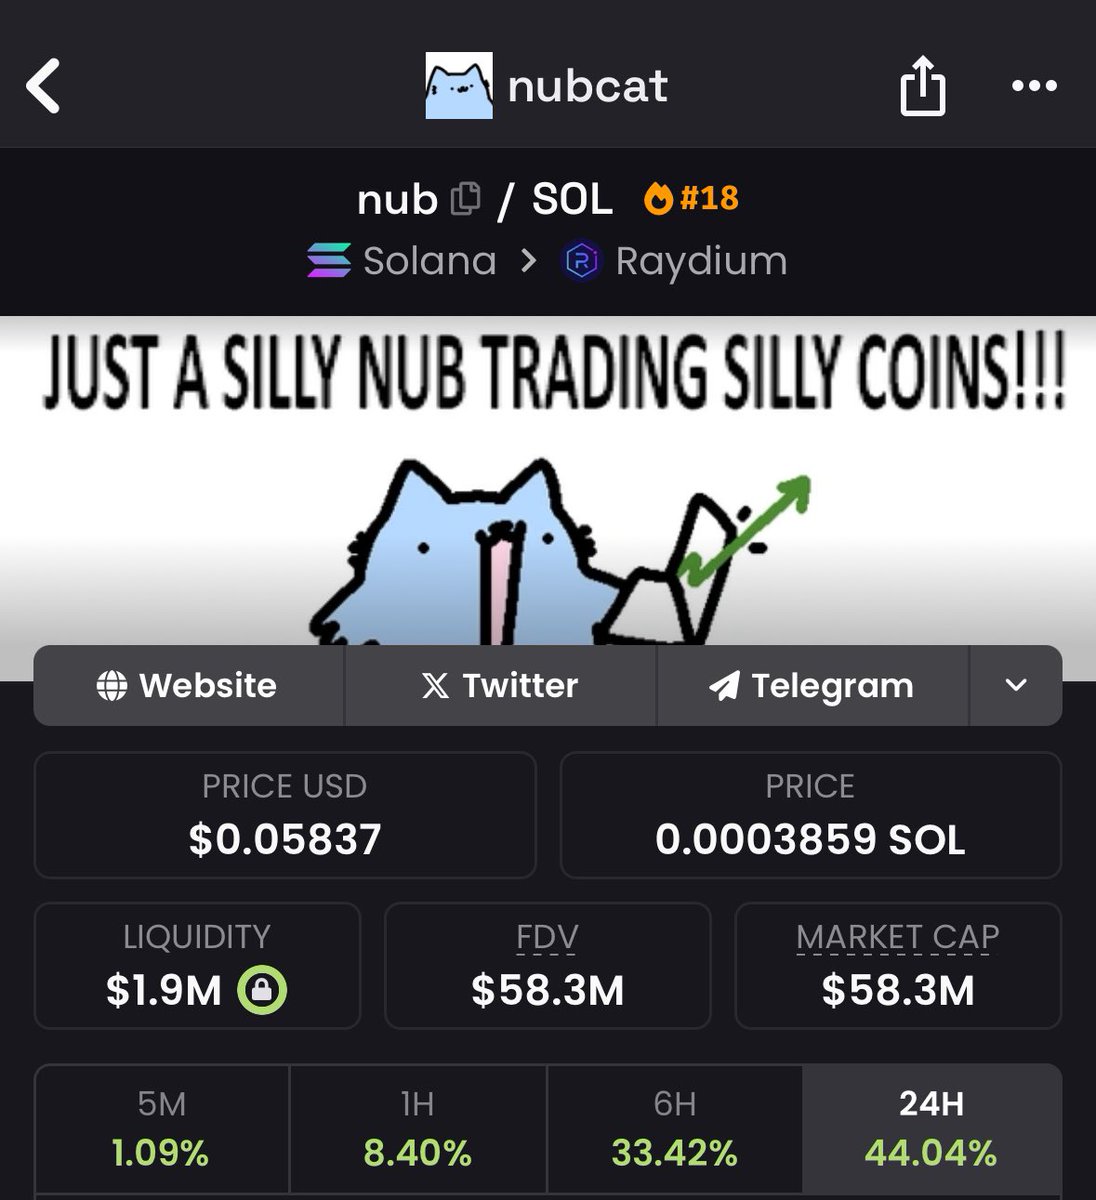 you know what’s funny with nub? we’re still only at 5.8% from the first target imagine all the roof we still have to grind it’s never too late